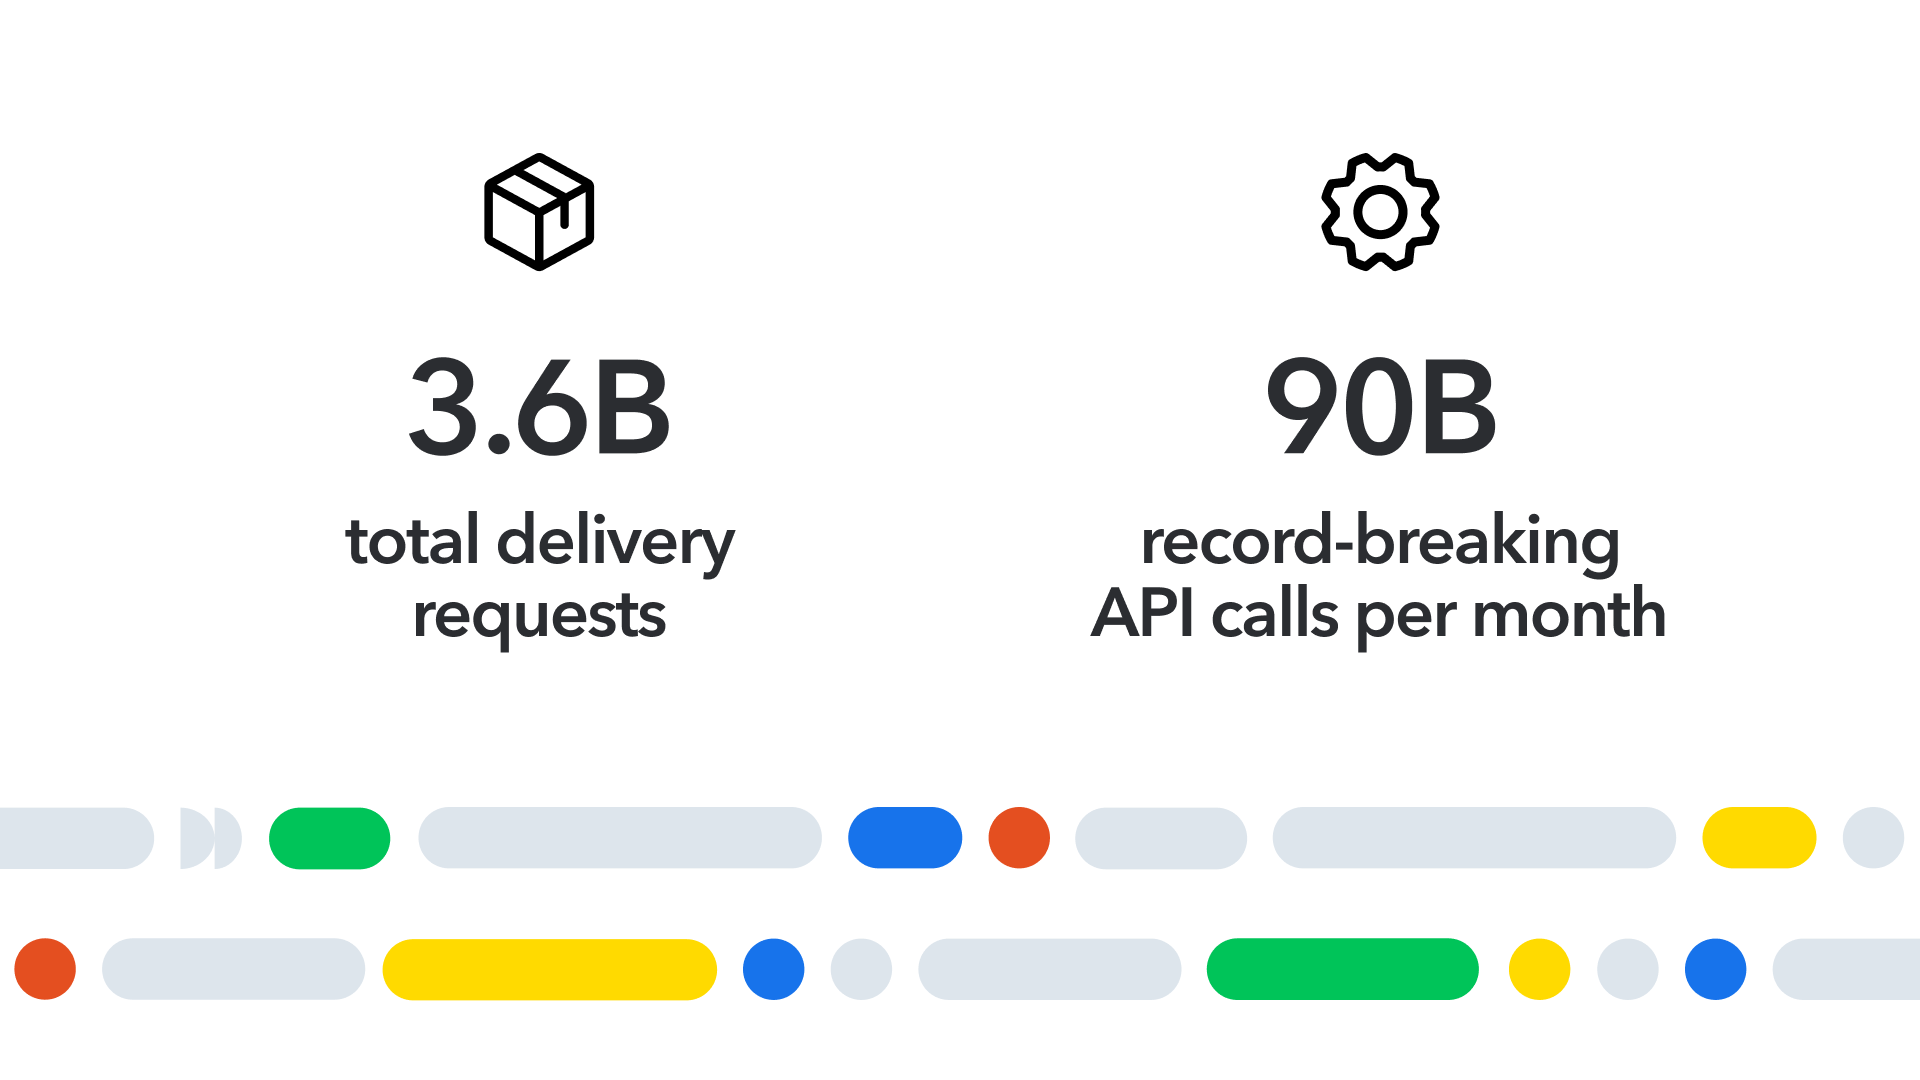 We supported 3.6 billion total delivery requests in a single day on November 24, an increase of 38% on the previous year, and a record-breaking 90 billion API calls for the month of November. 